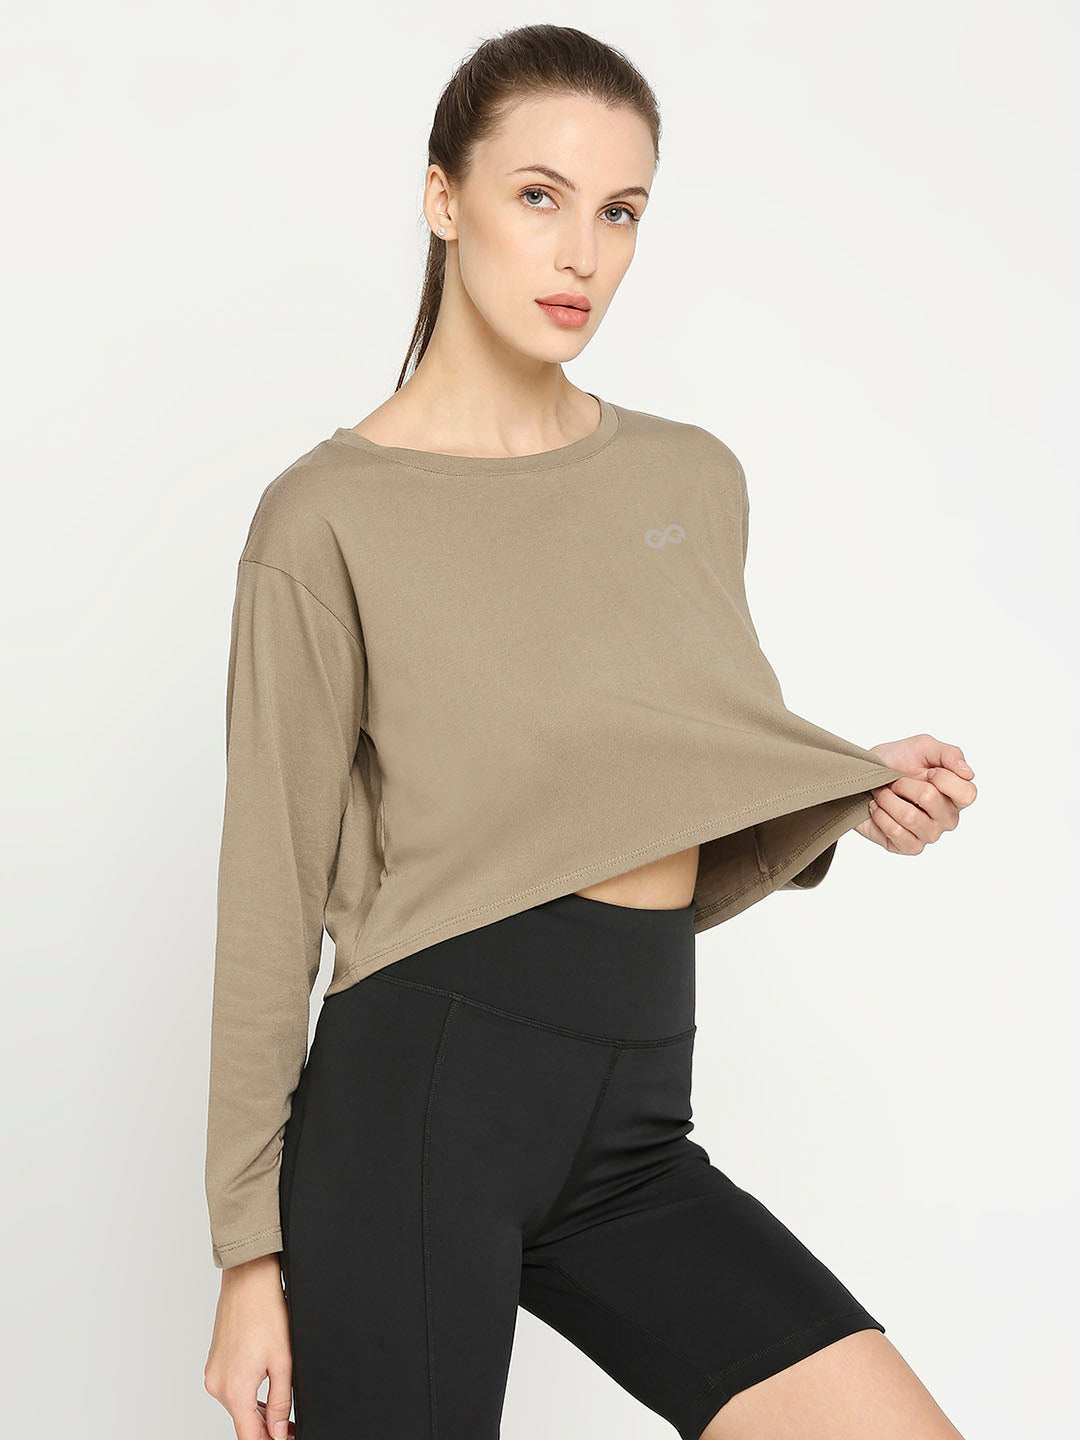 Women's Long Sleeves Sports Cropped T-Shirt - Mud Brown